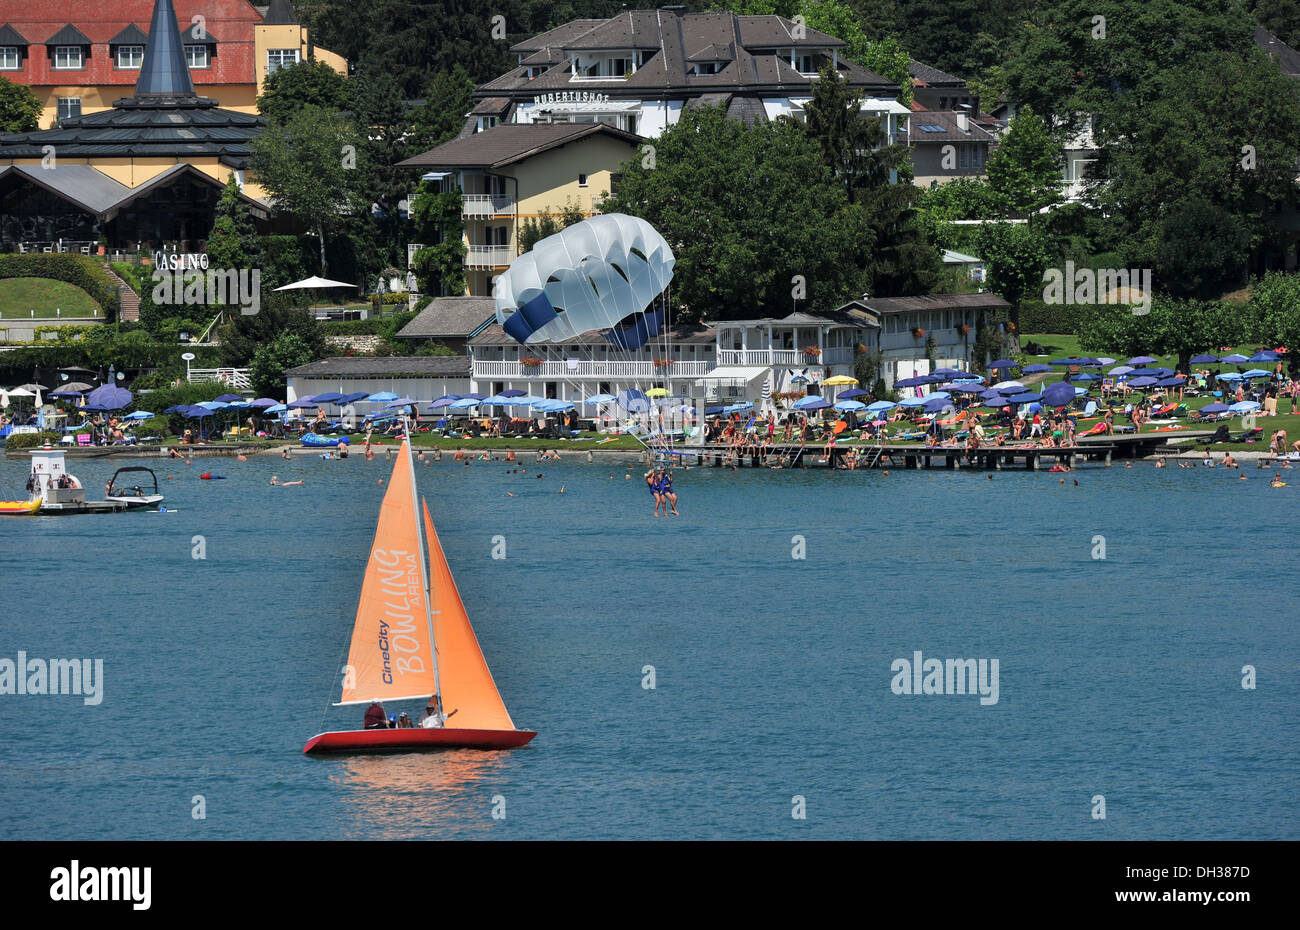 A view of the Lake of the popular holiday resort of Velden am Worthersee in Austria Stock Photo